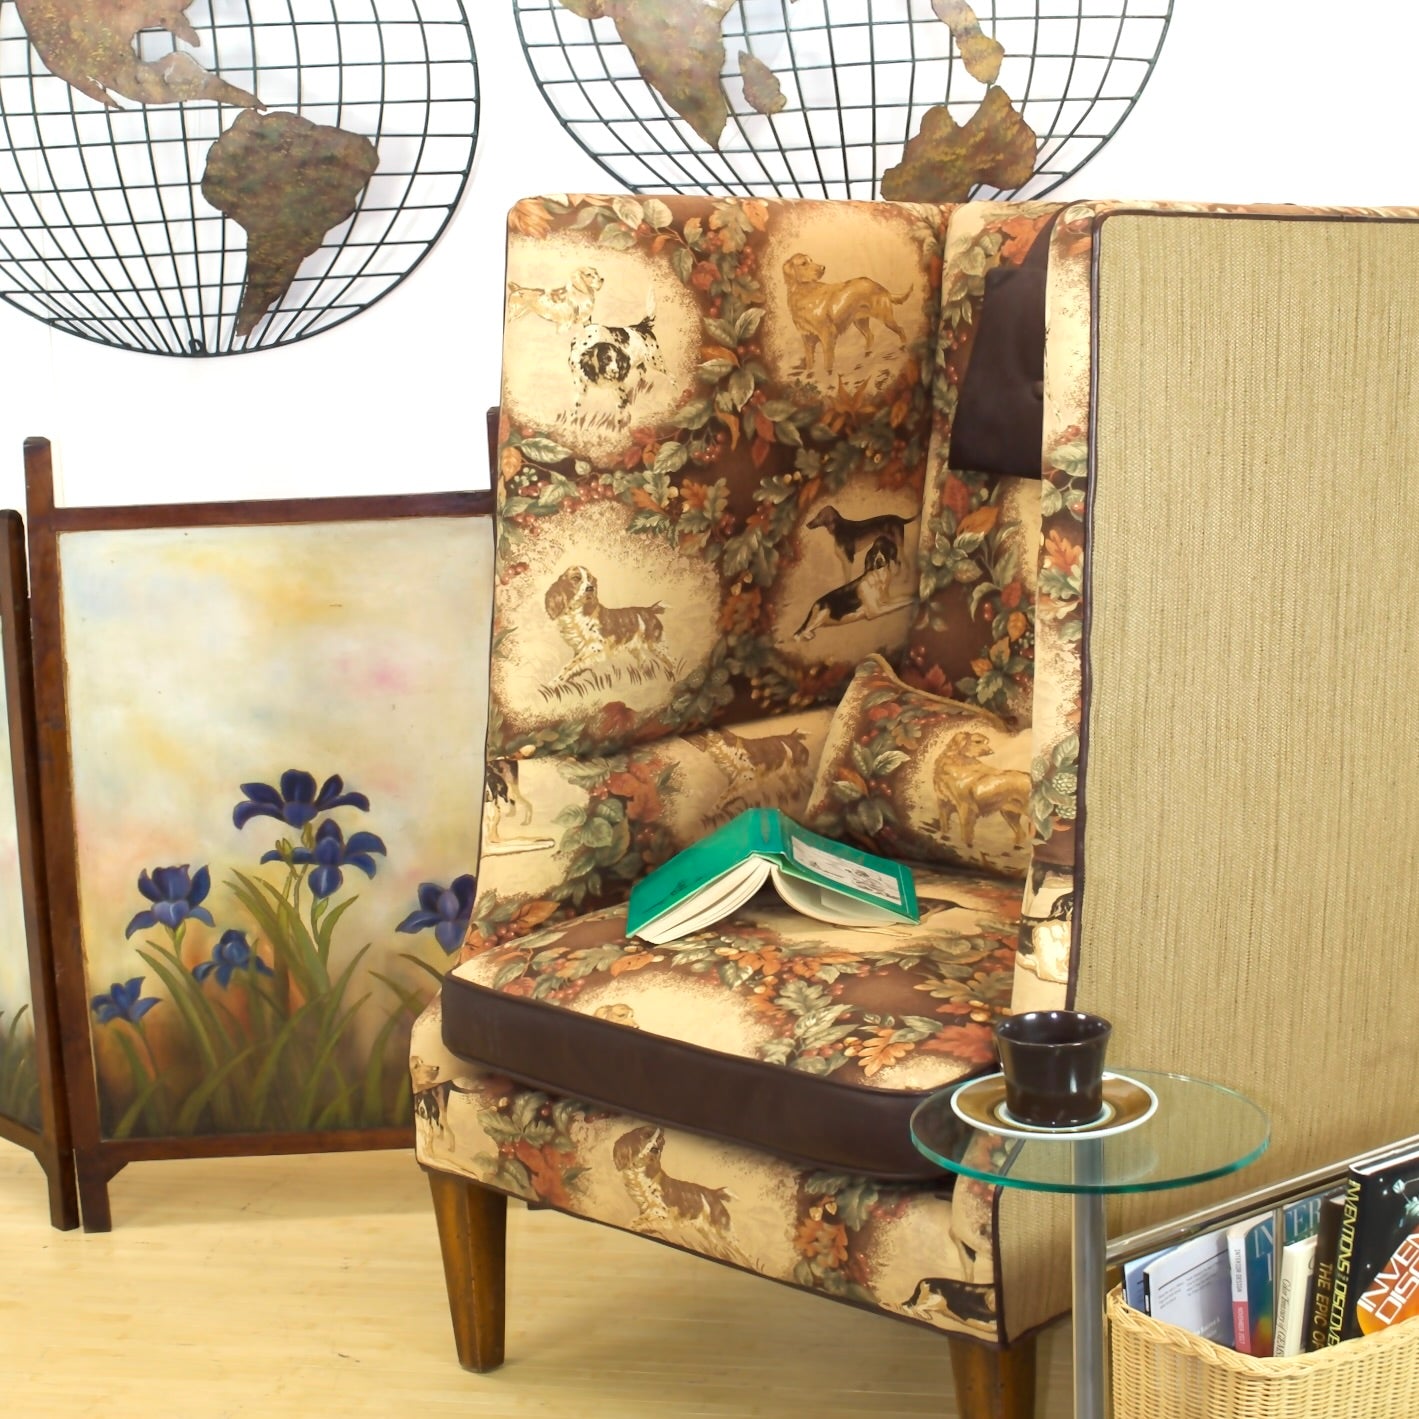 Privacy Chair with old world style bird dog and nature themed upholstery with leather accents.